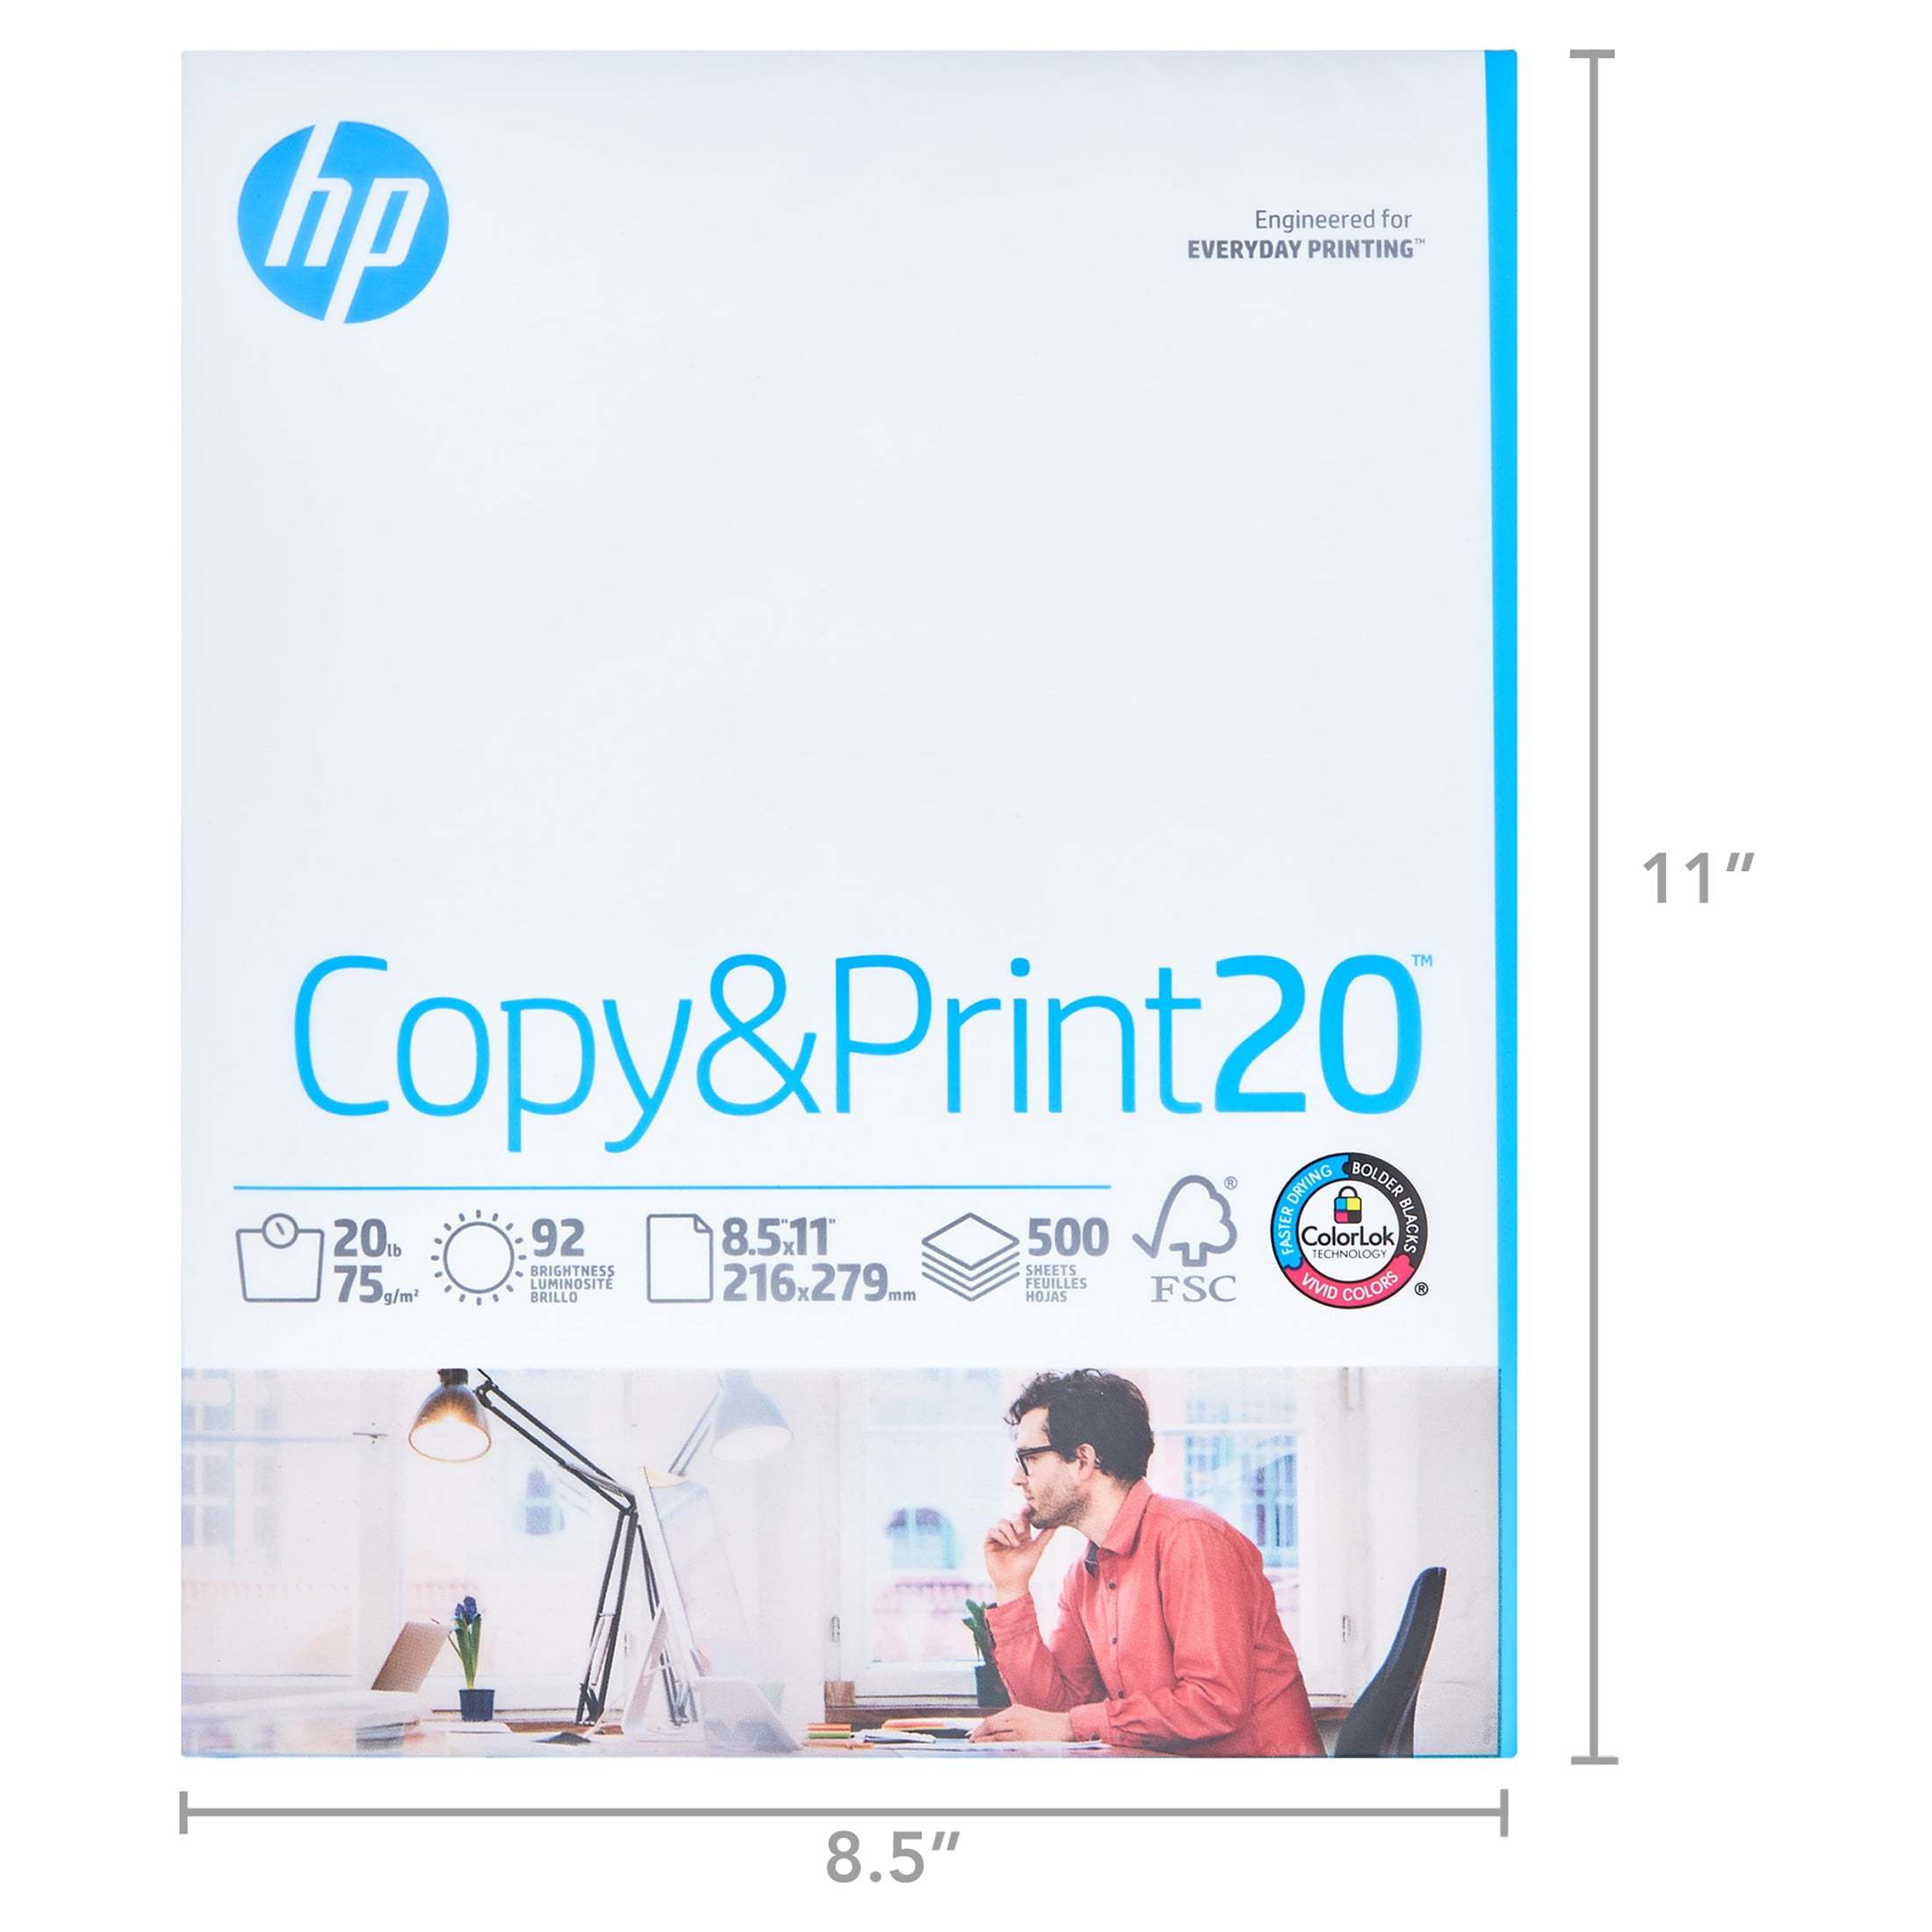 Great Value, Hp Premium Choice Laserjet Paper, 100 Bright, 32 Lb Bond  Weight, 8.5 X 11, Ultra White, 500/Ream by HEWLETT PACKARD COMPANY